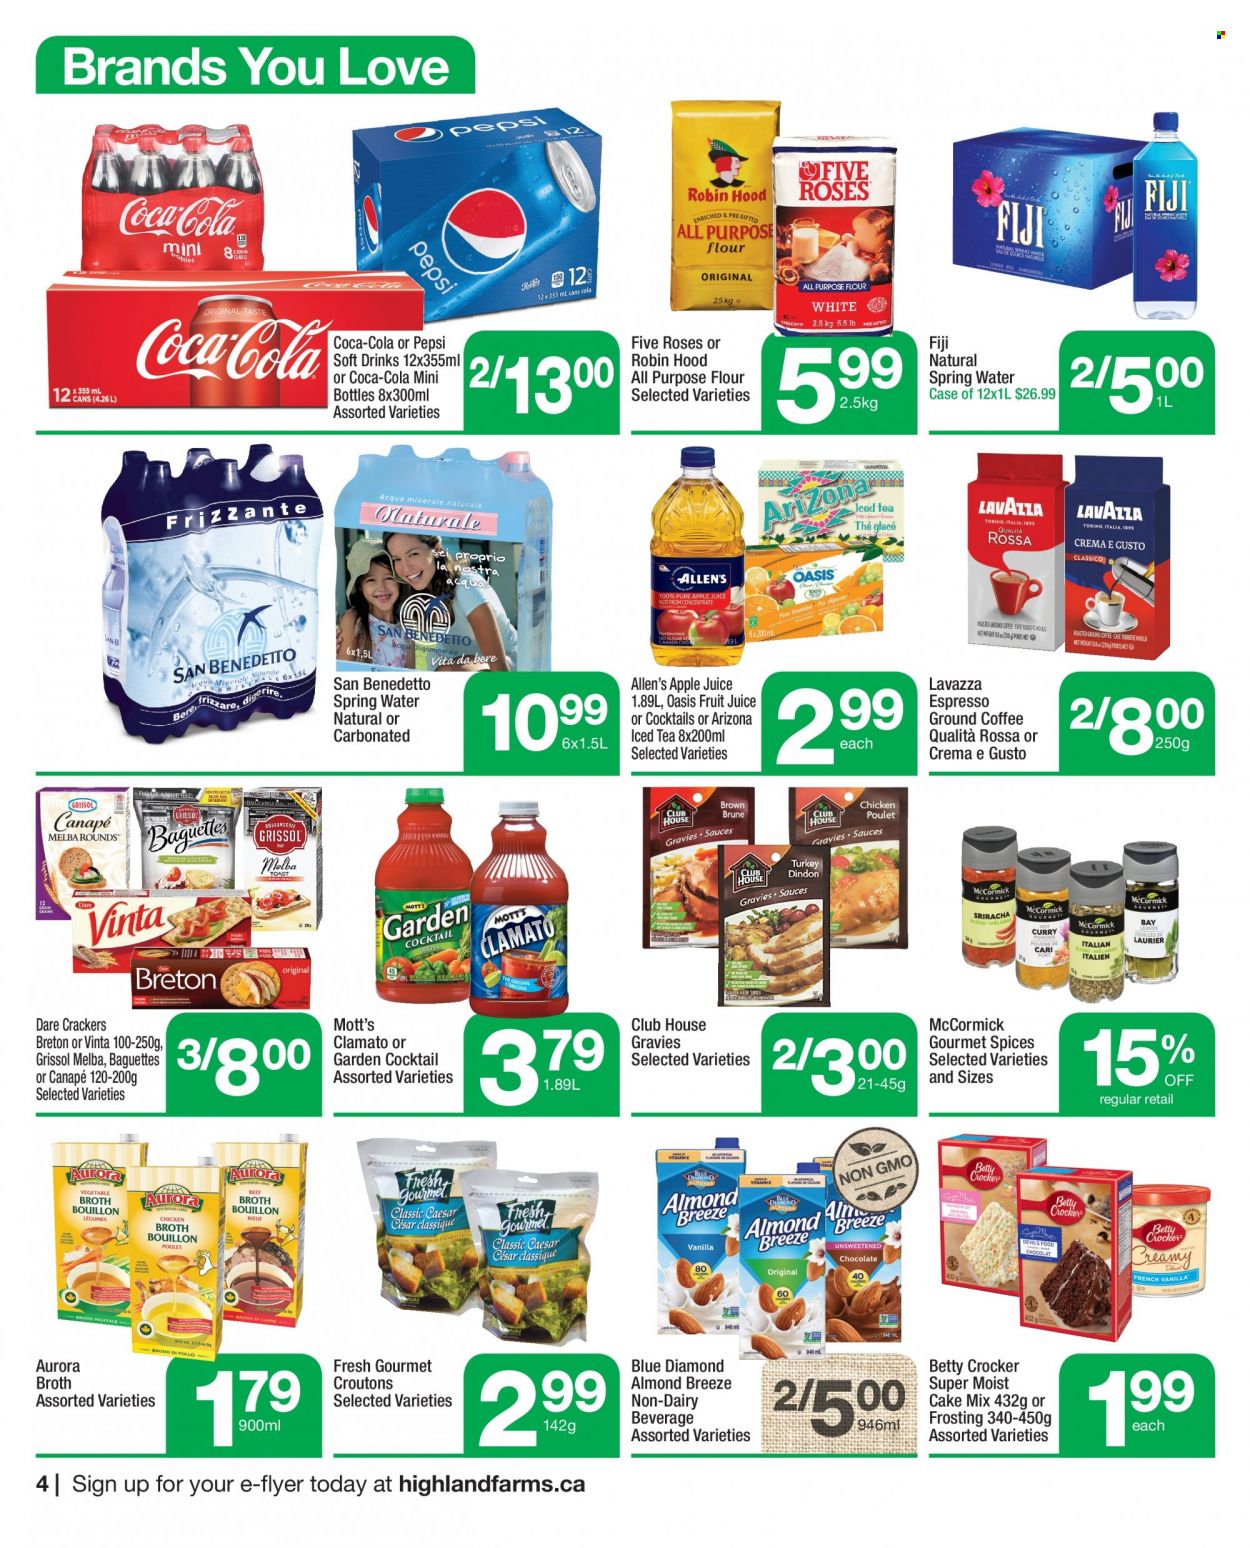 thumbnail - Highland Farms Flyer - March 30, 2023 - April 12, 2023 - Sales products - cake mix, Mott's, Almond Breeze, crackers, all purpose flour, croutons, flour, frosting, broth, Blue Diamond, apple juice, Coca-Cola, Pepsi, juice, fruit juice, ice tea, Clamato, soft drink, AriZona, spring water, water, coffee, ground coffee, Lavazza, baguette. Page 4.